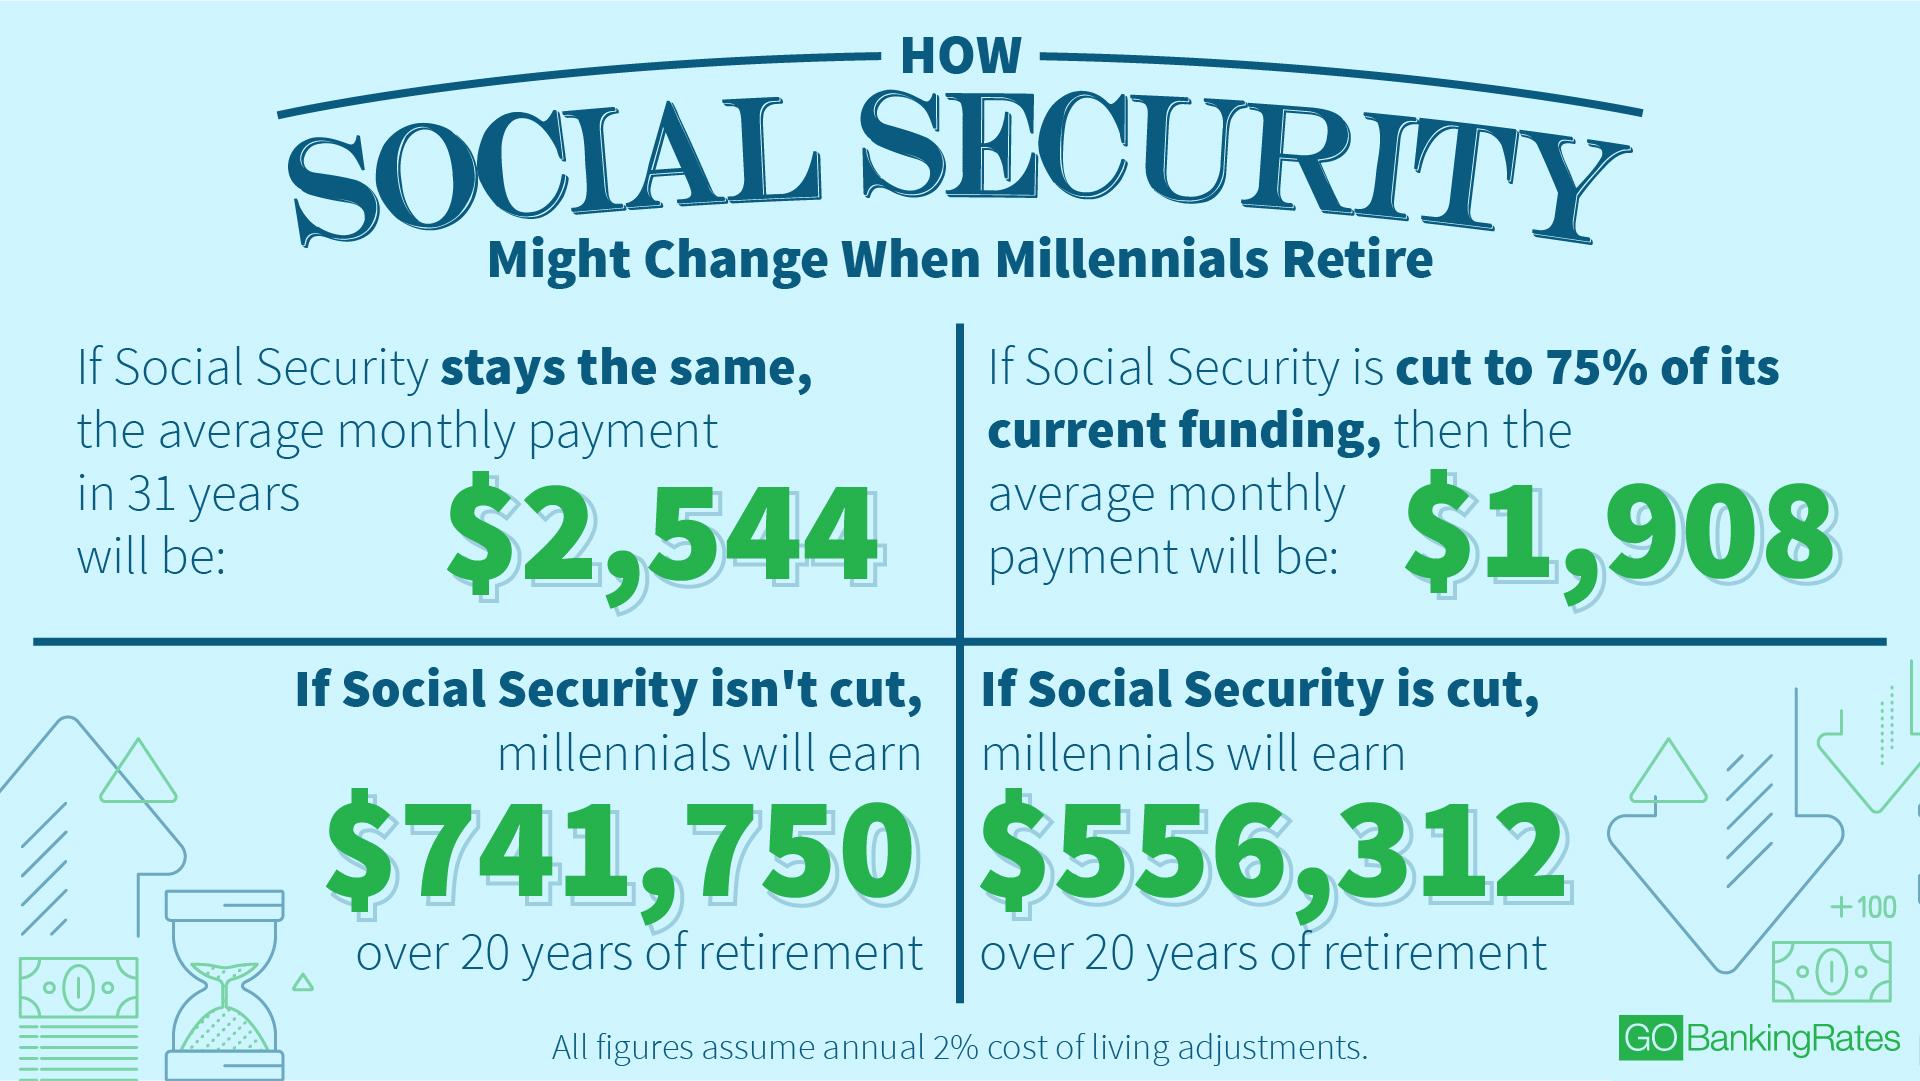 Here's What Social Security Will Look Like by the Time Millennials